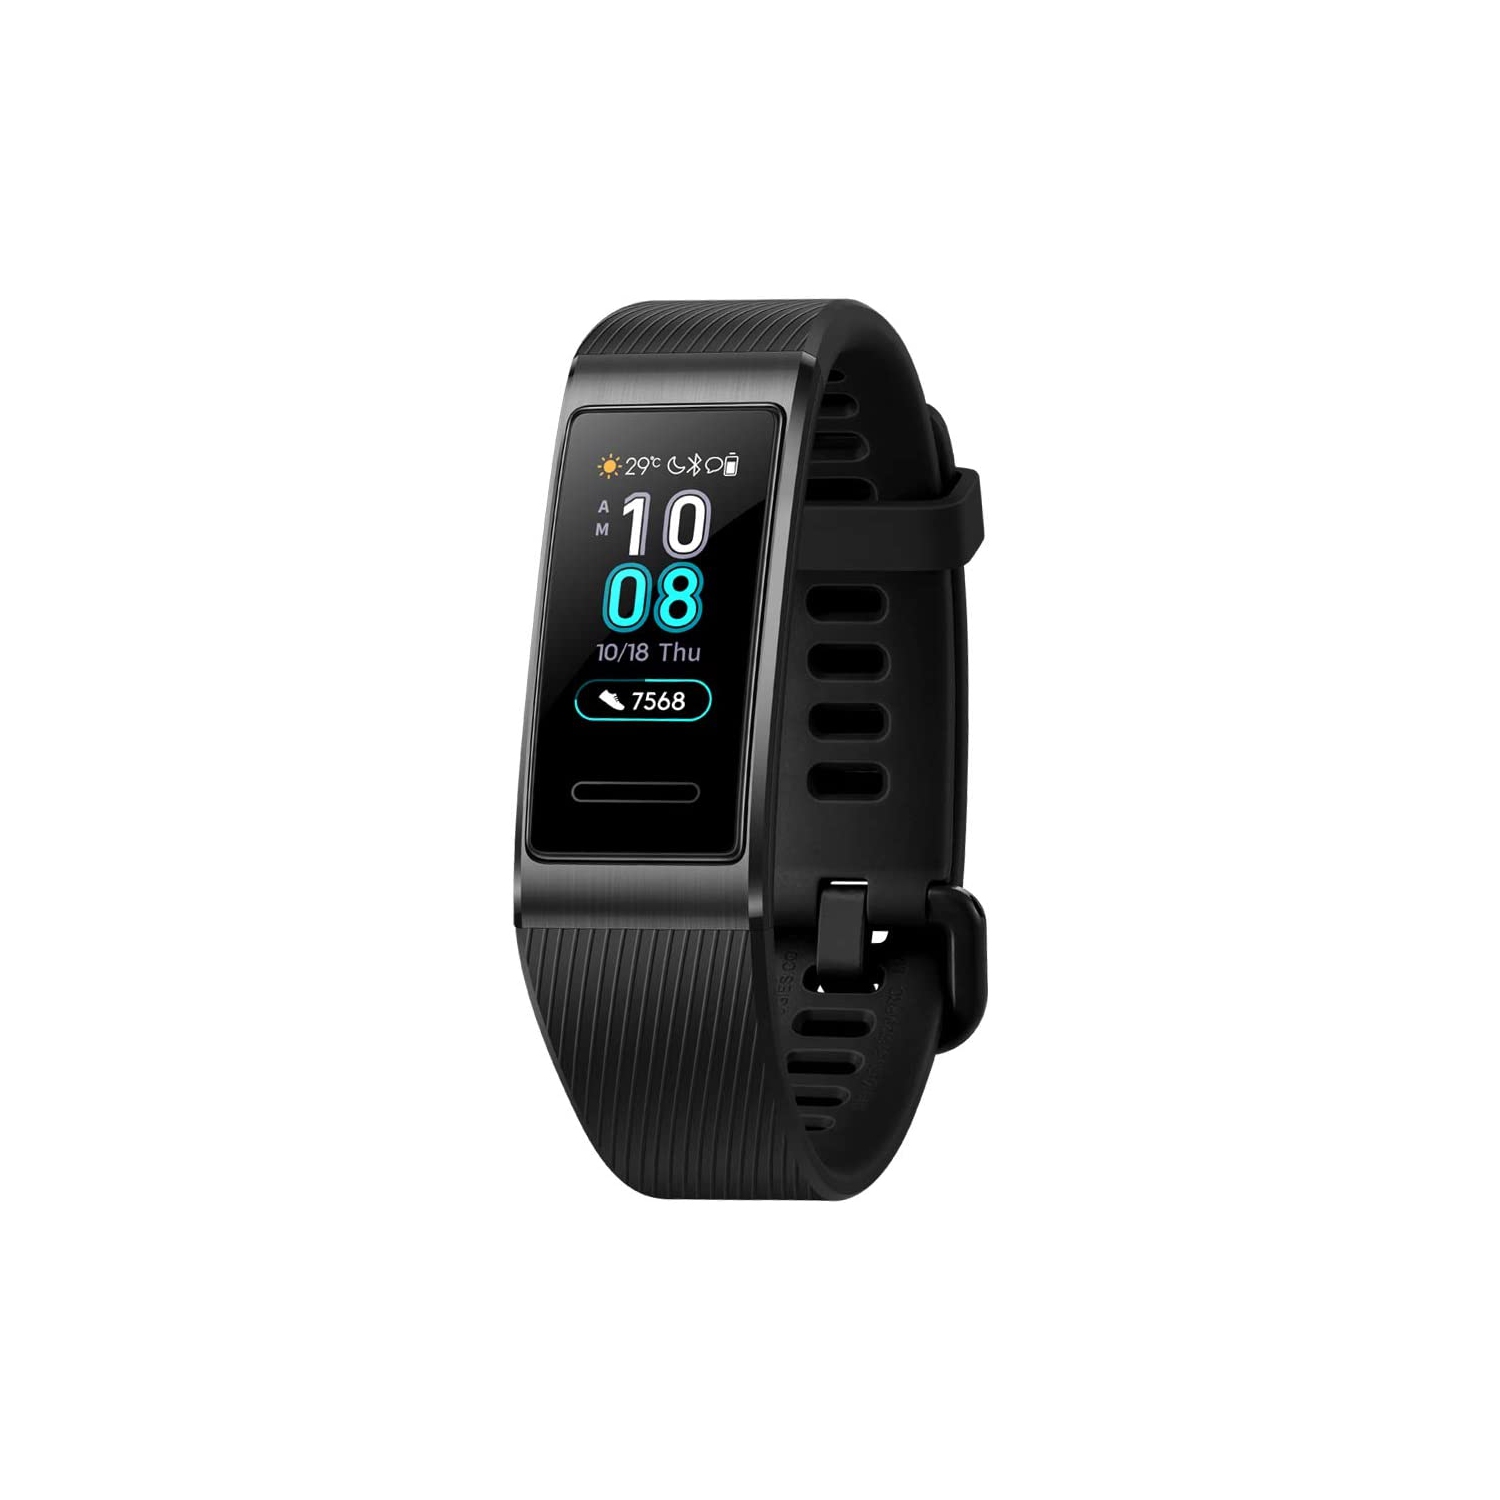 Huawei Band 3 Pro All-in-One Fitness Activity Tracker Water Resistance Swim Heart Rate Monitor Multi-Sports Mode-Black